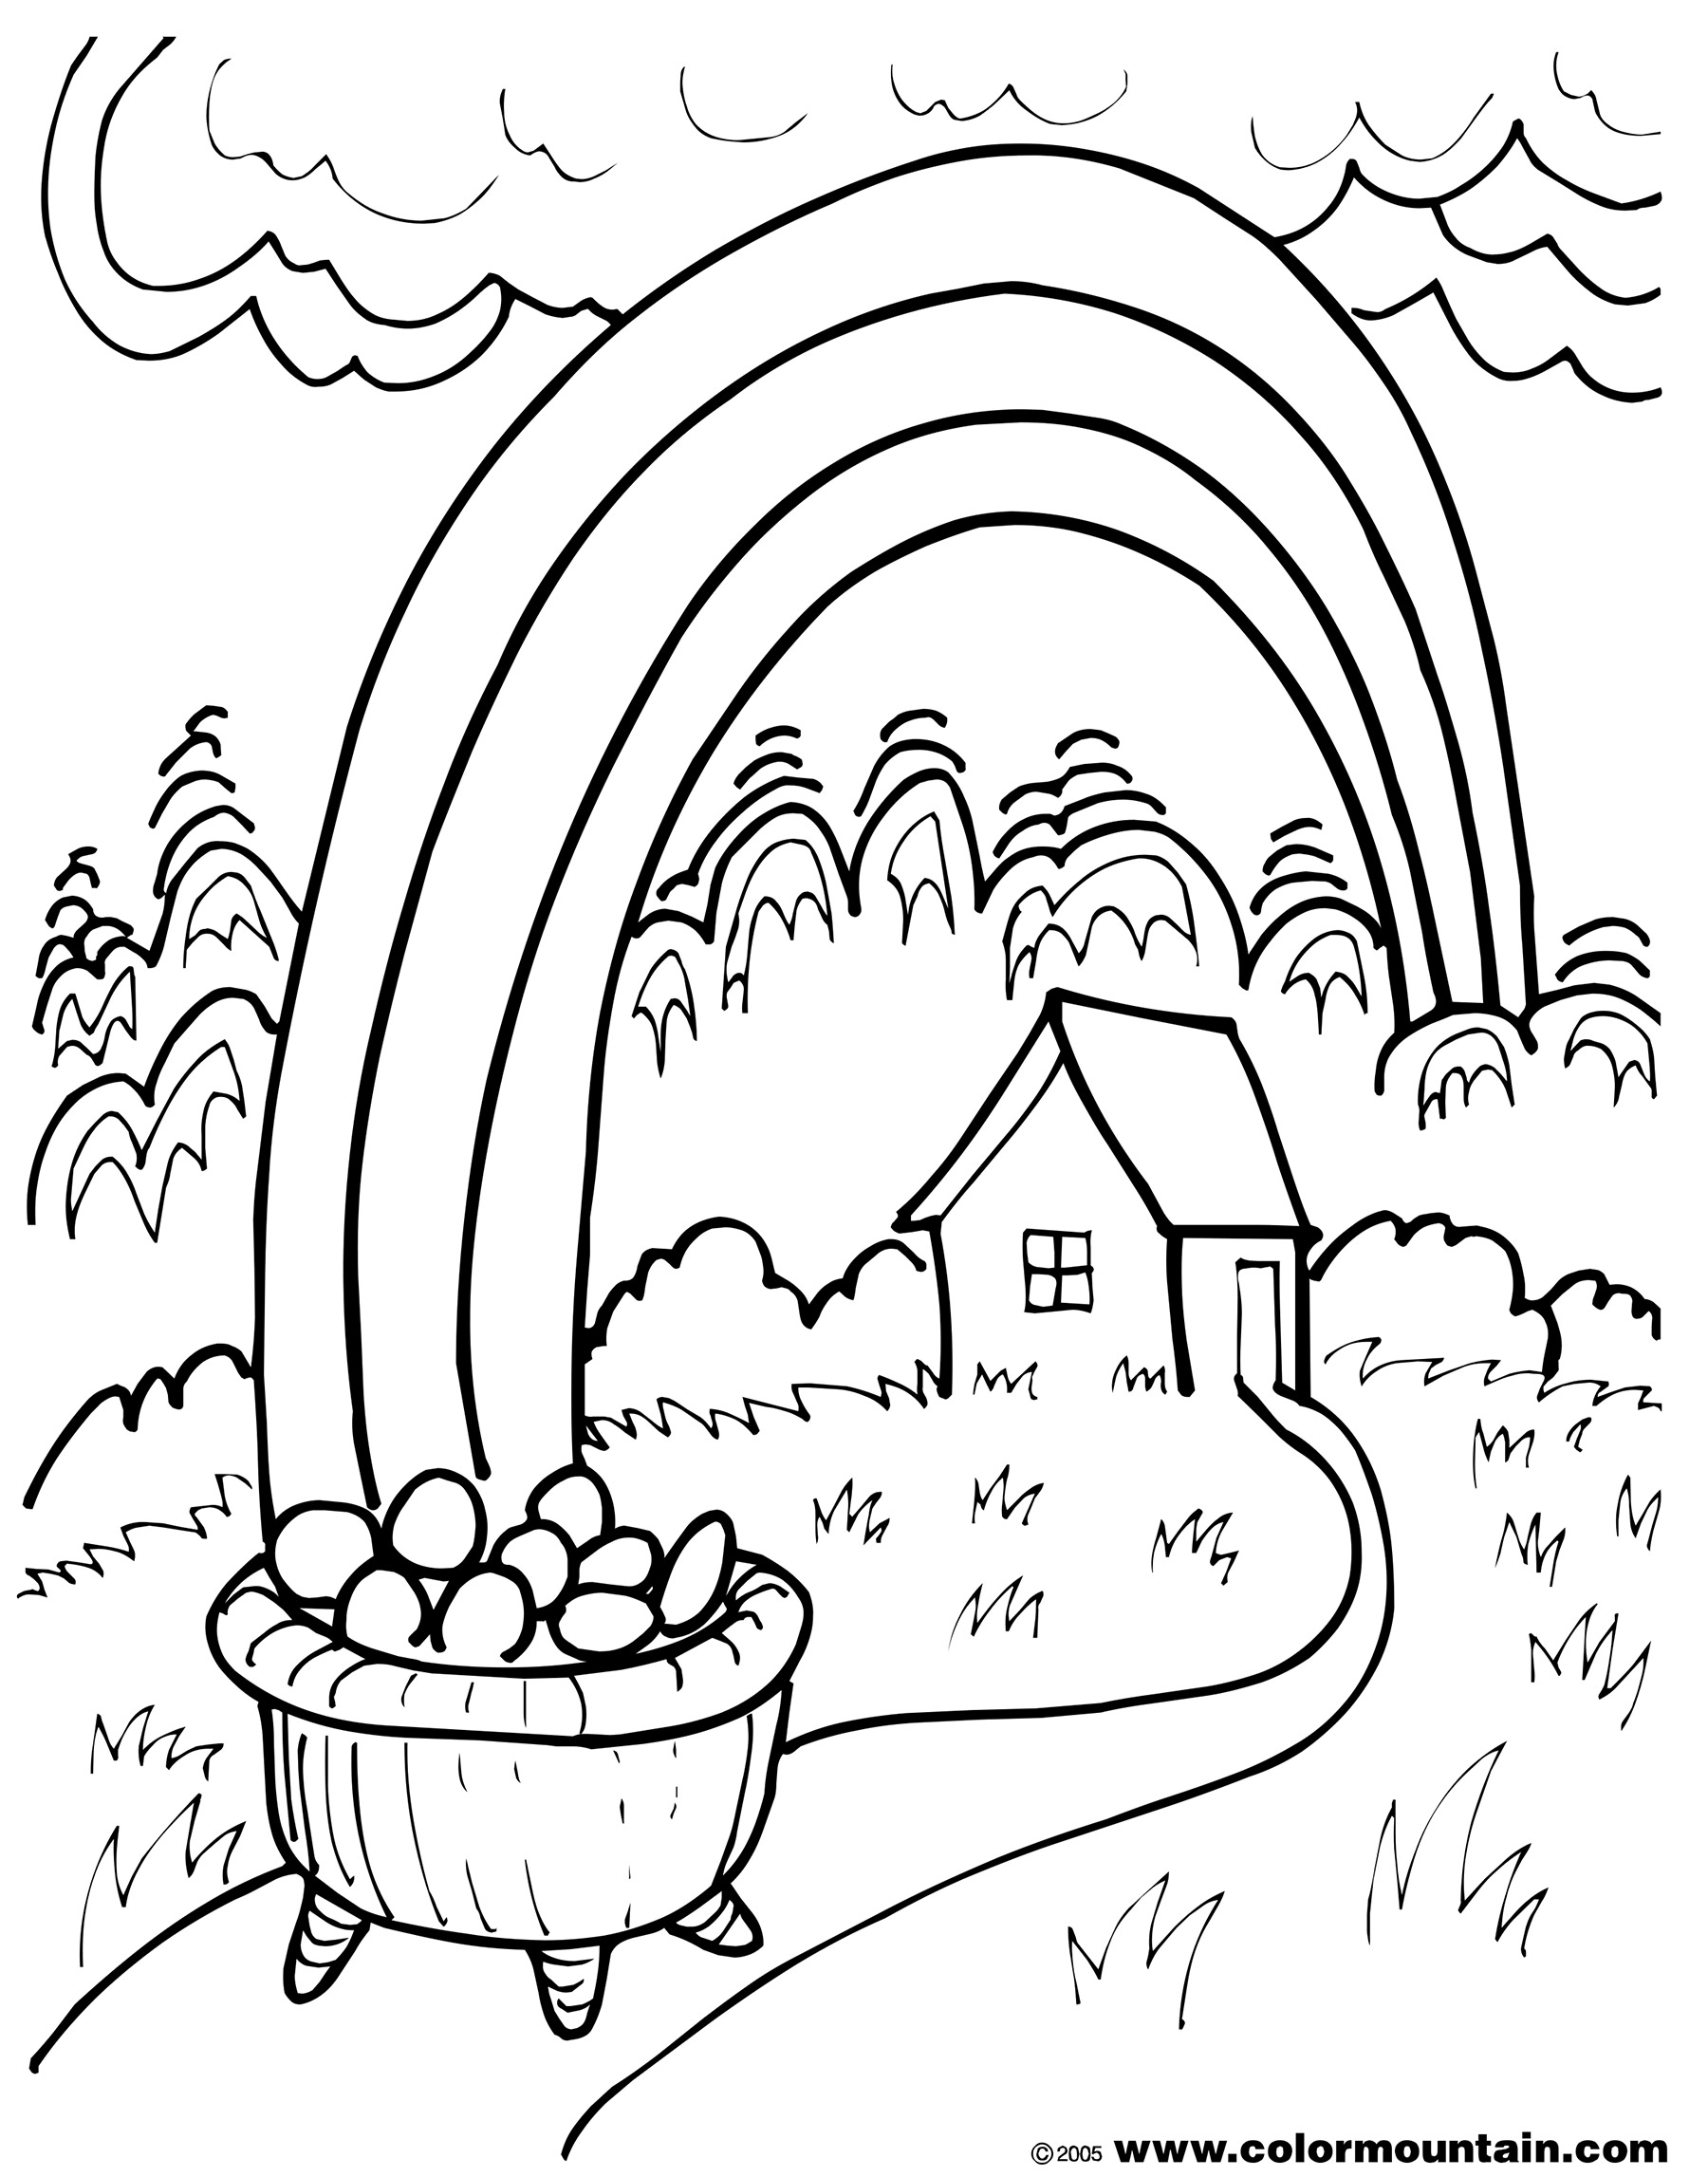 Preschool Rainbow Coloring Page Coloring Pages